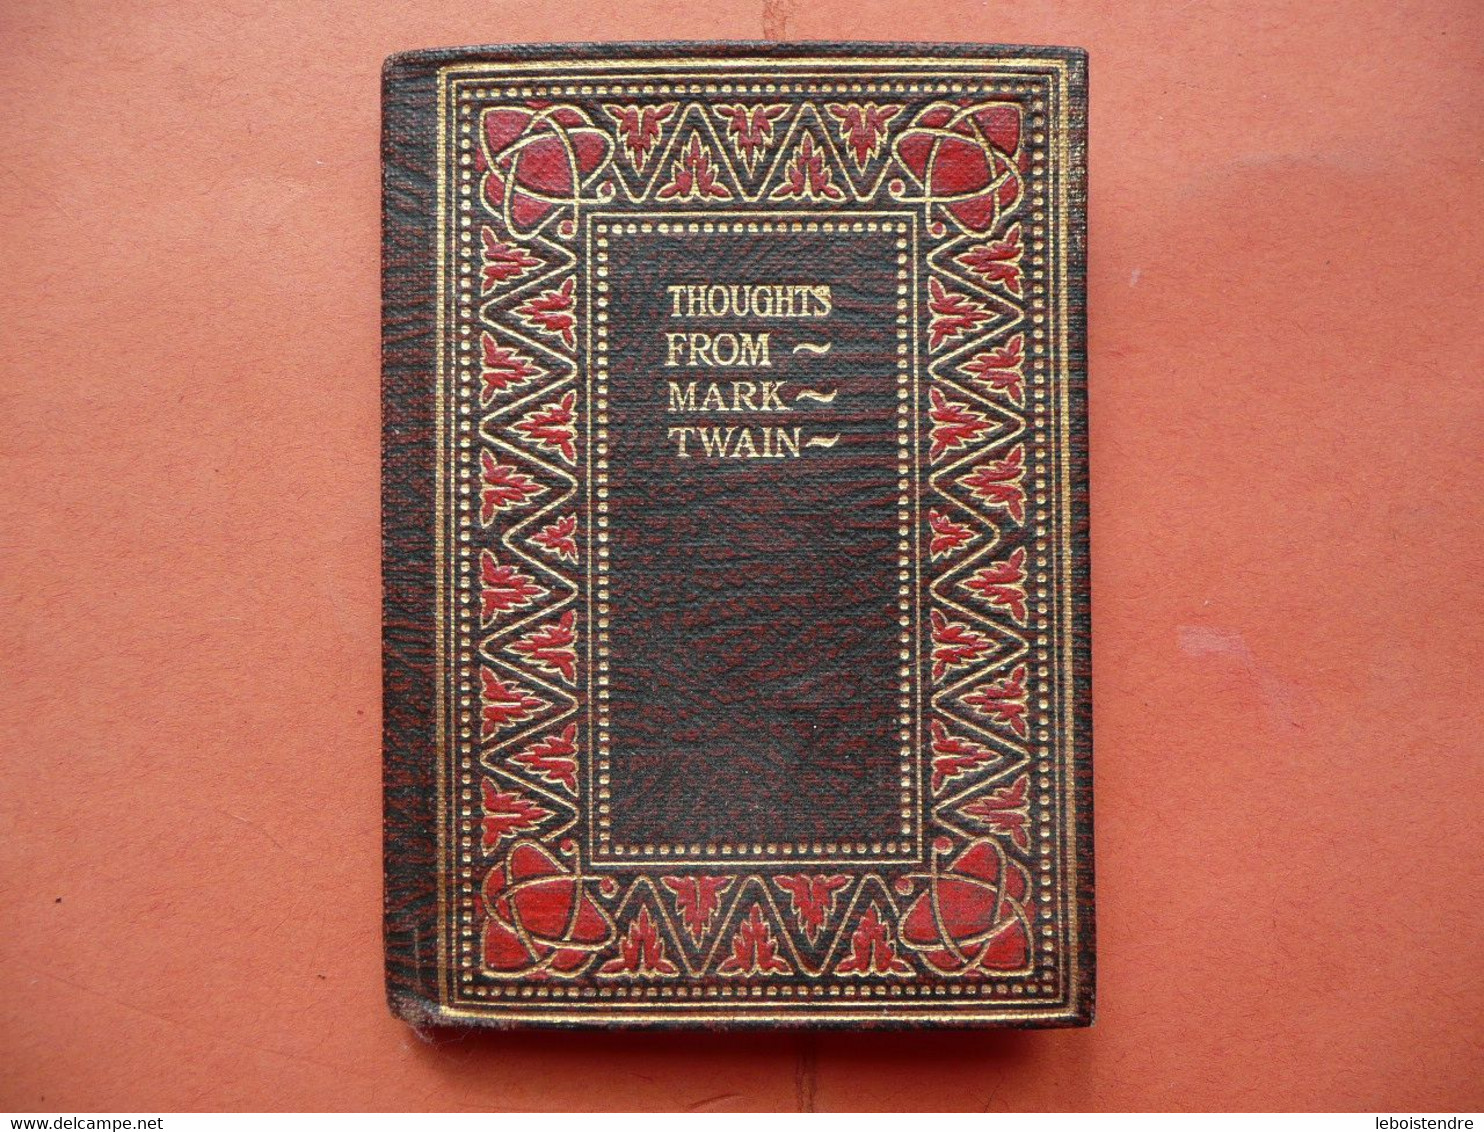 THOUGHTS FROM MARK TWAIN SELECTED BY ELSIE E. MORTON SESAME BOOKLETS MINIATURE - Letteratura